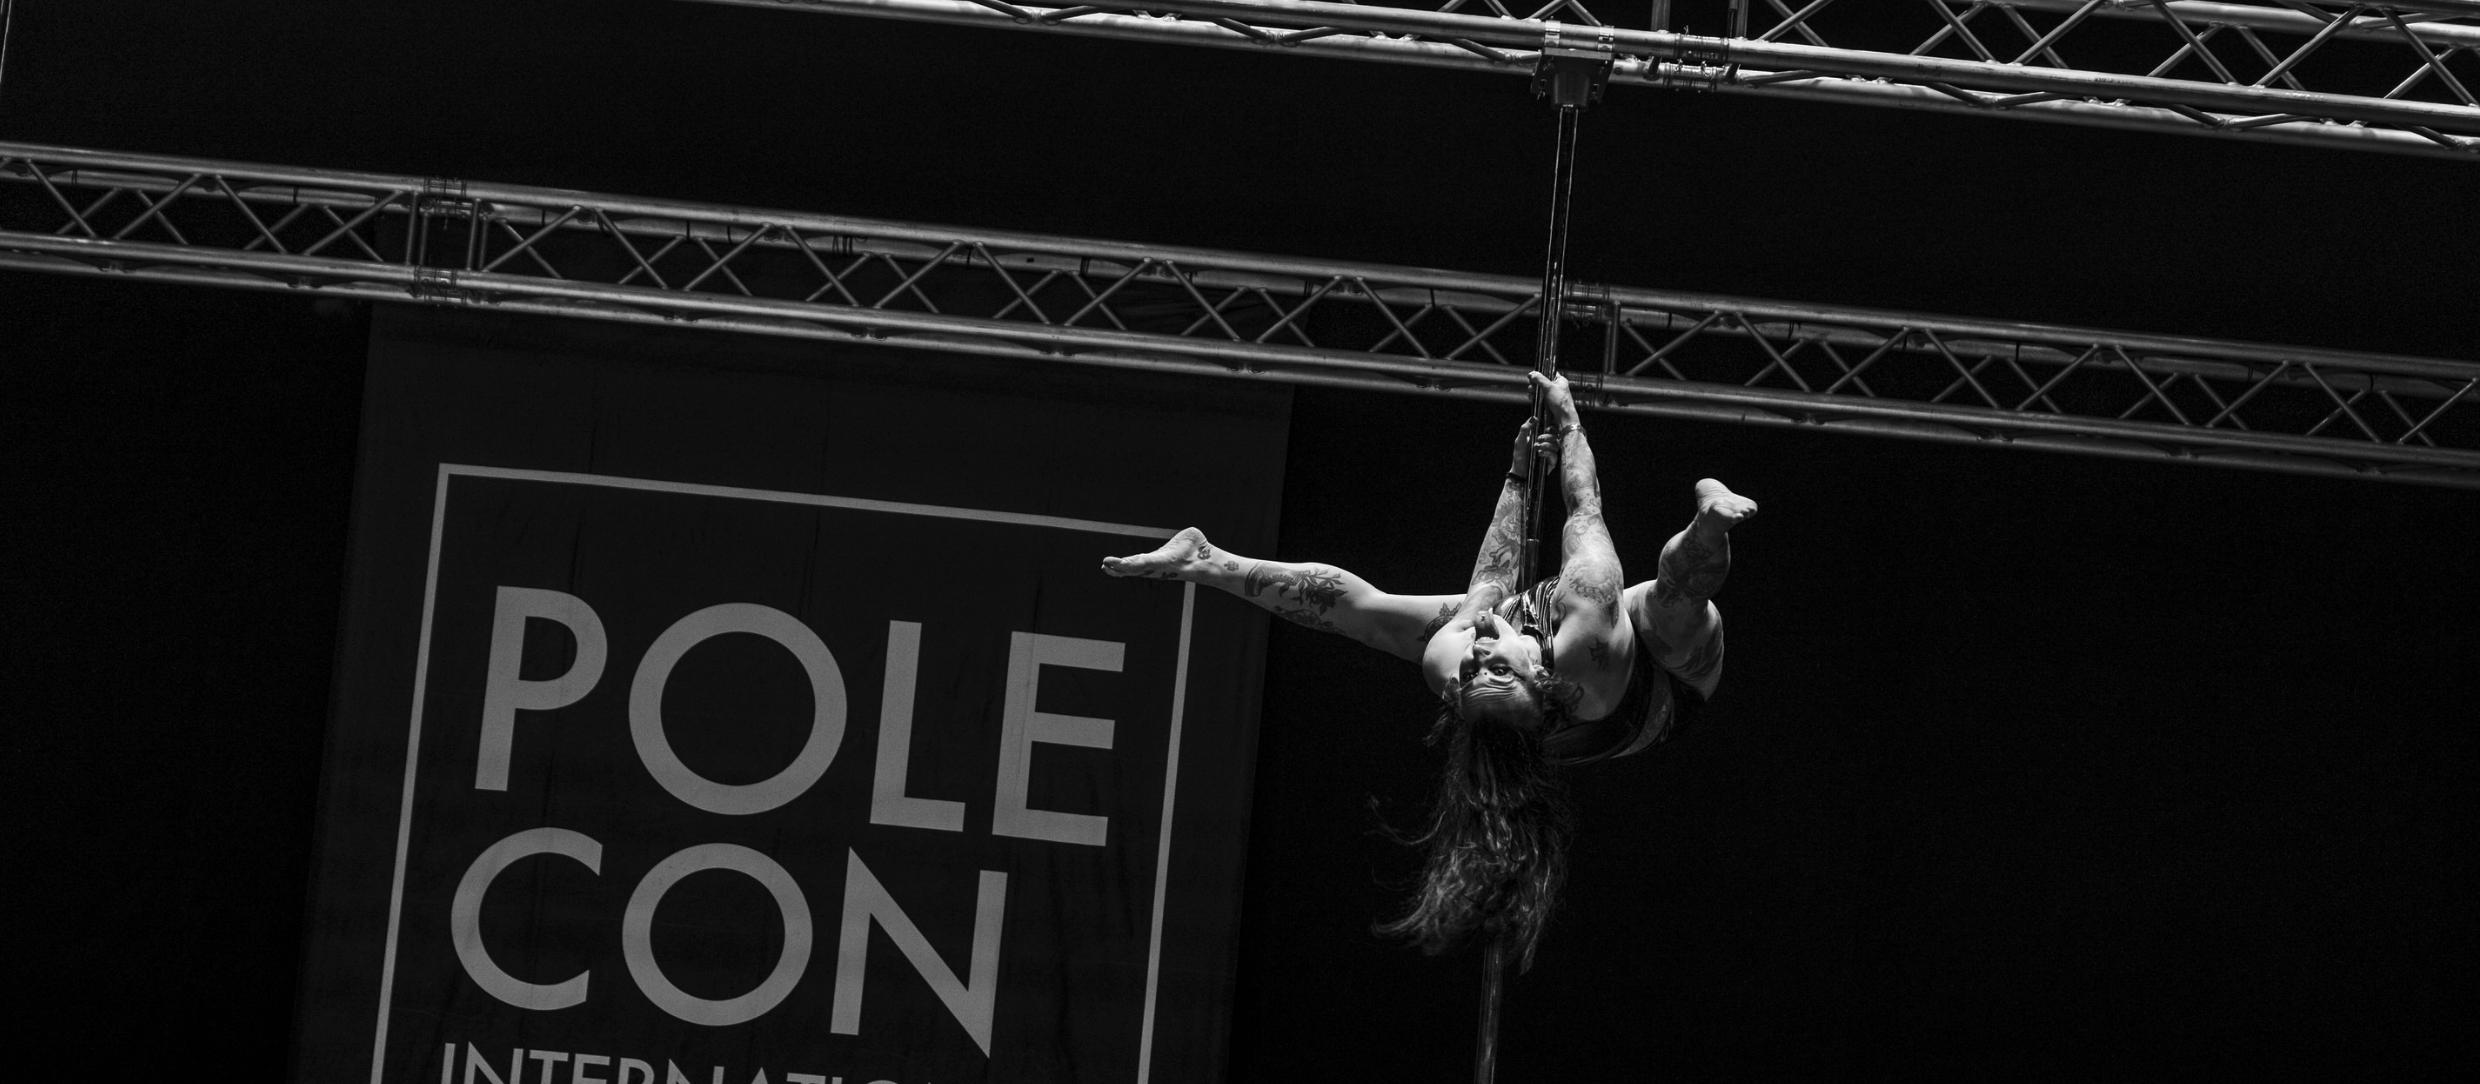 Casey Danzig does an inverted pole move on the PoleCon stage.